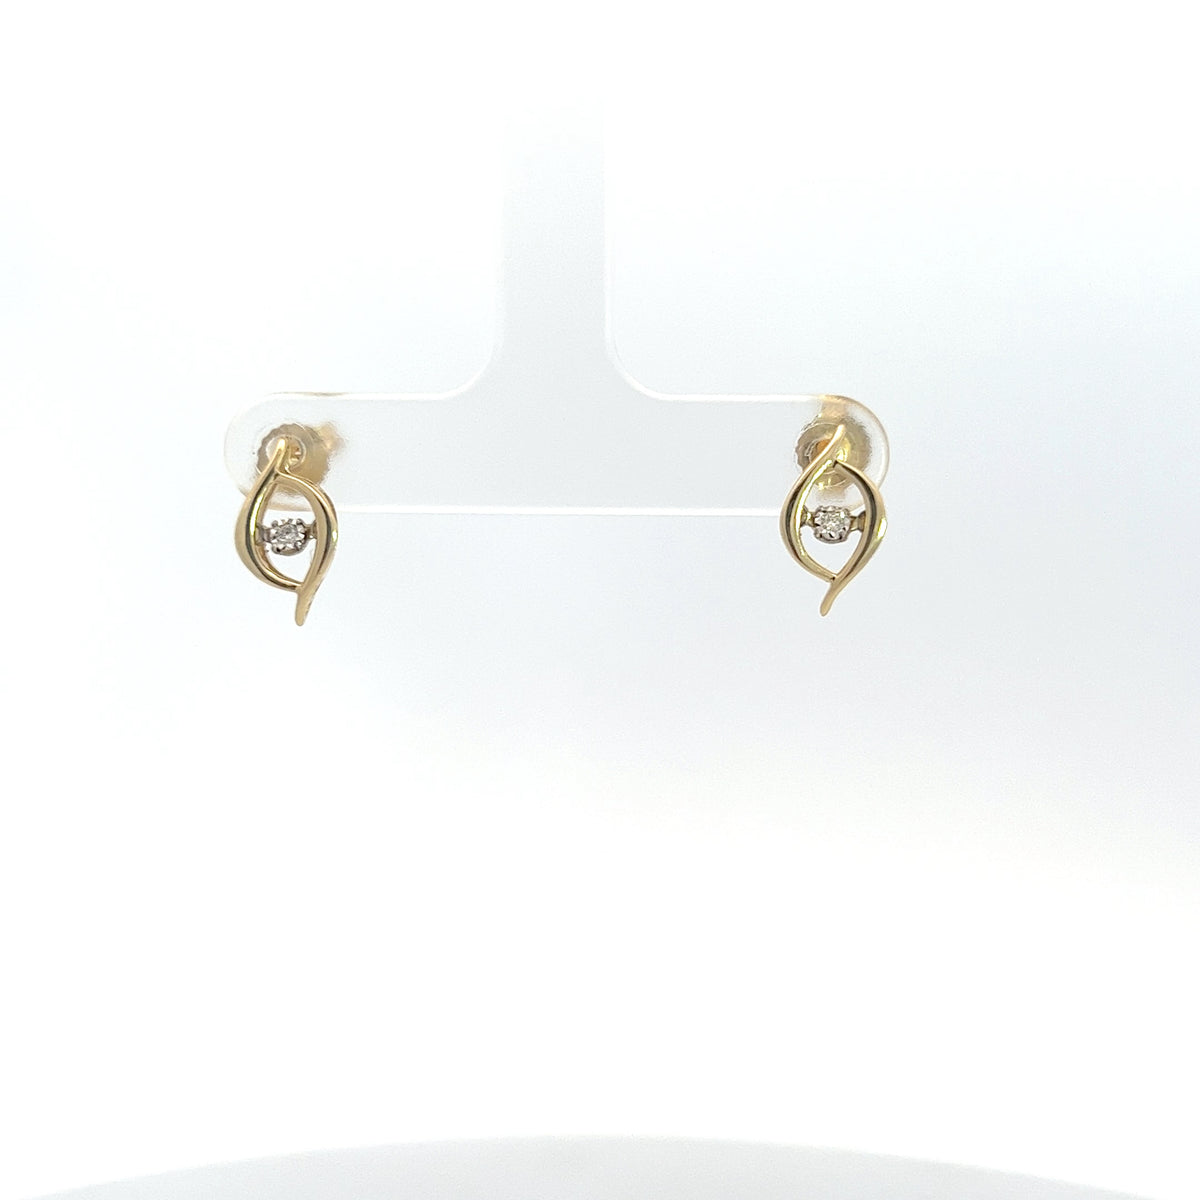 10K Yellow Gold Pulse Diamond Solitaire Earrings 0.02cttw